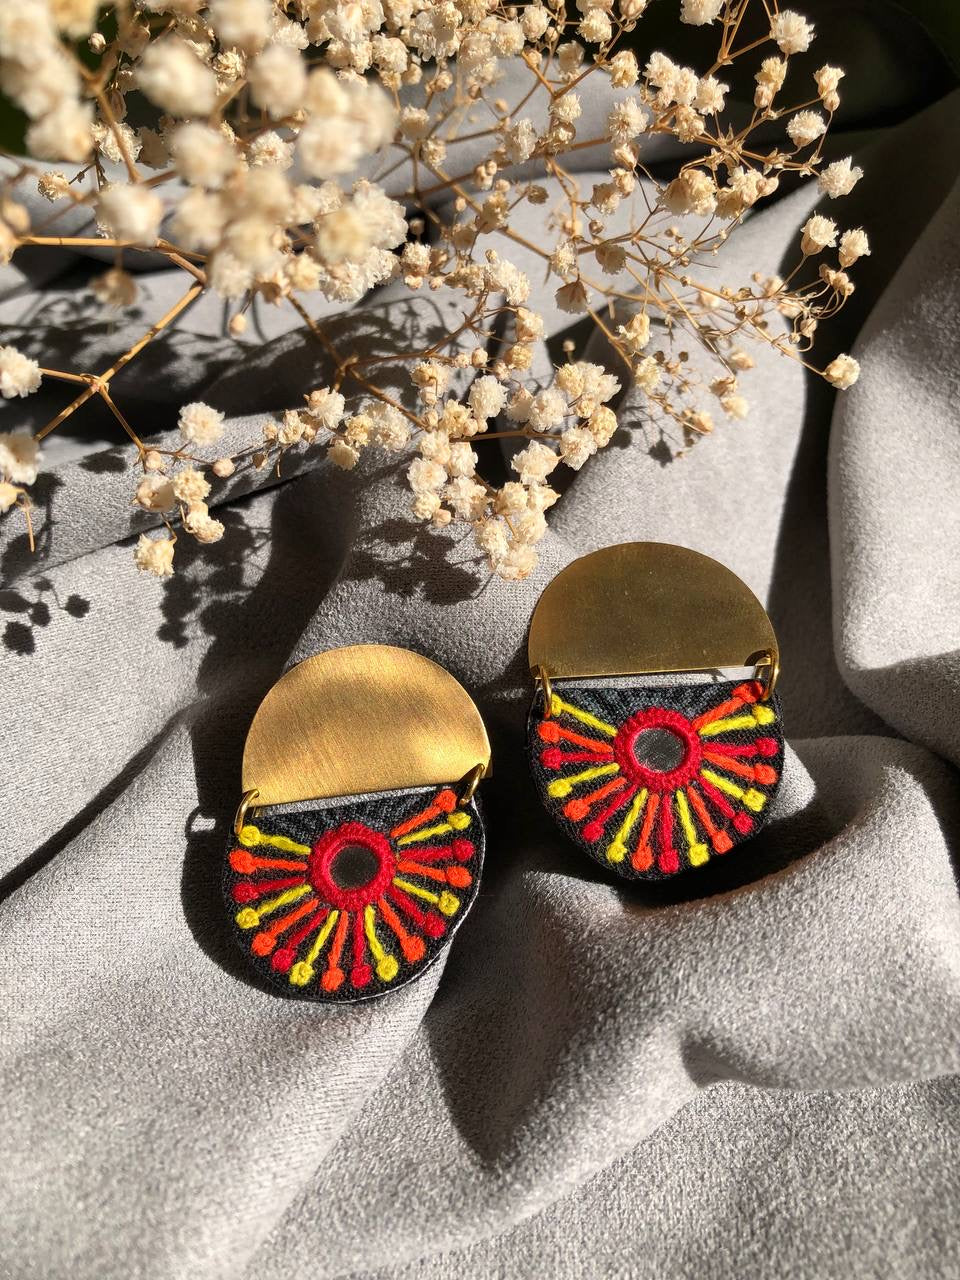 Handmade Embroidered Semi Circular Earrings With Multi color Thread